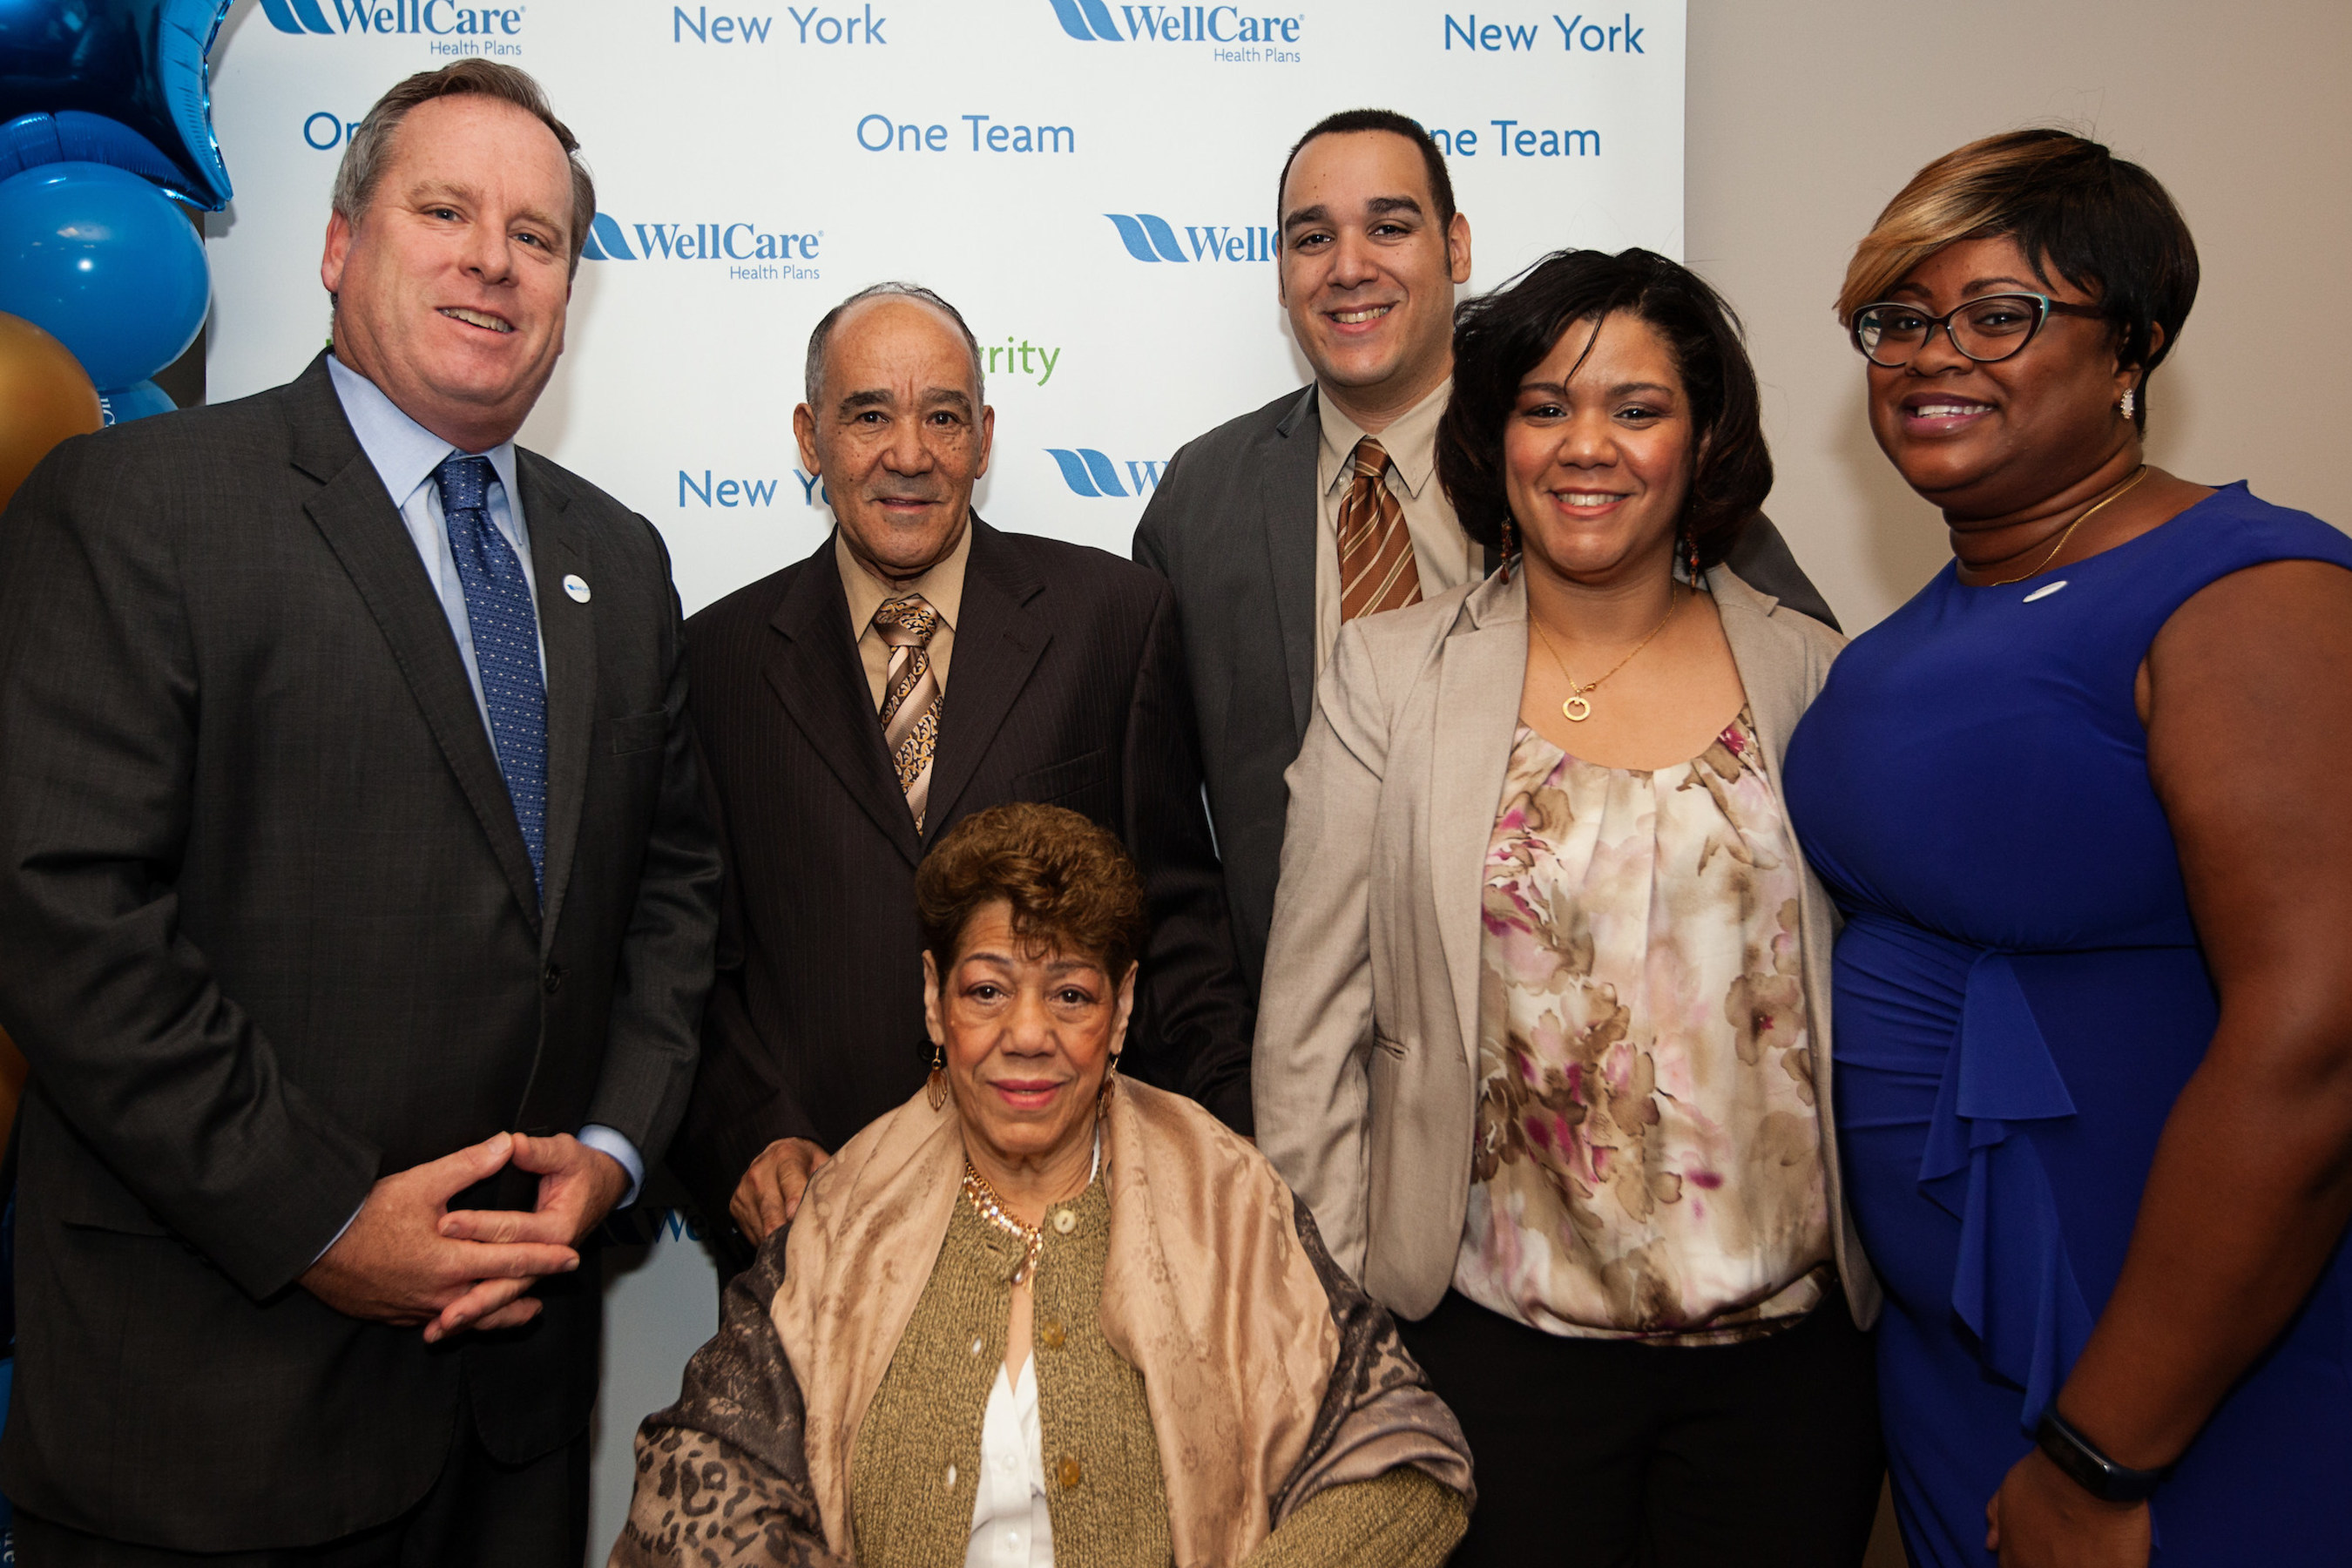 Maria Marte, pictured in the wheelchair above, is surrounded by her family and WellCare of New York President John J. Burke (far left) and WellCare of New York care manager Trisha Simon (far right). Mrs. Marte is a WellCare of New York member who was assisted by the company's field-based care management program, which is designed to provide personalized care to high-risk members to help them improve and maintain their health.